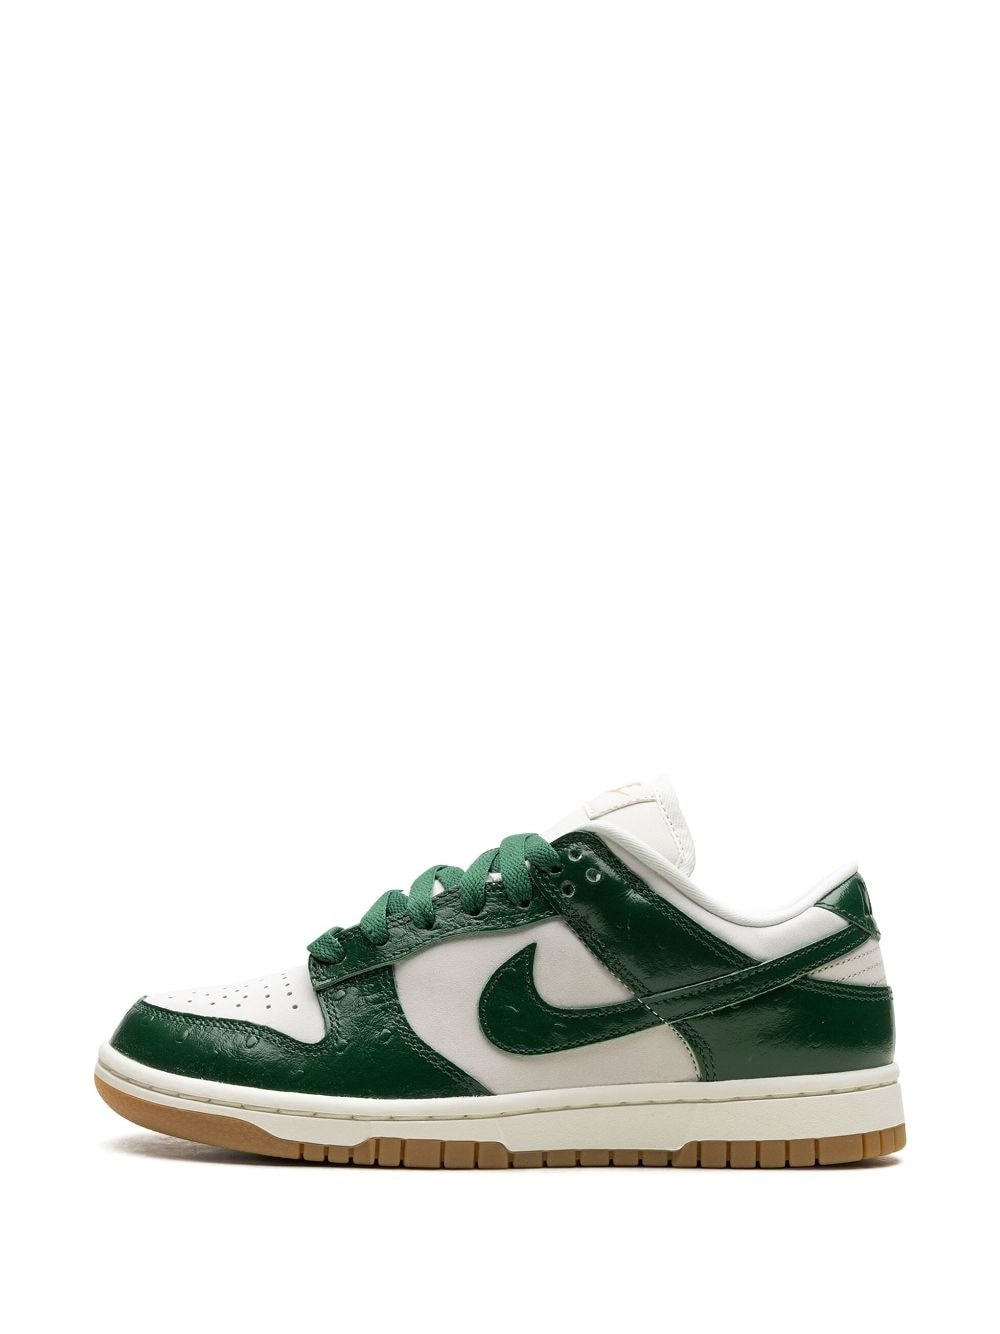 Dunk Low LX "Gorge Green Ostrich" sneakers - 5